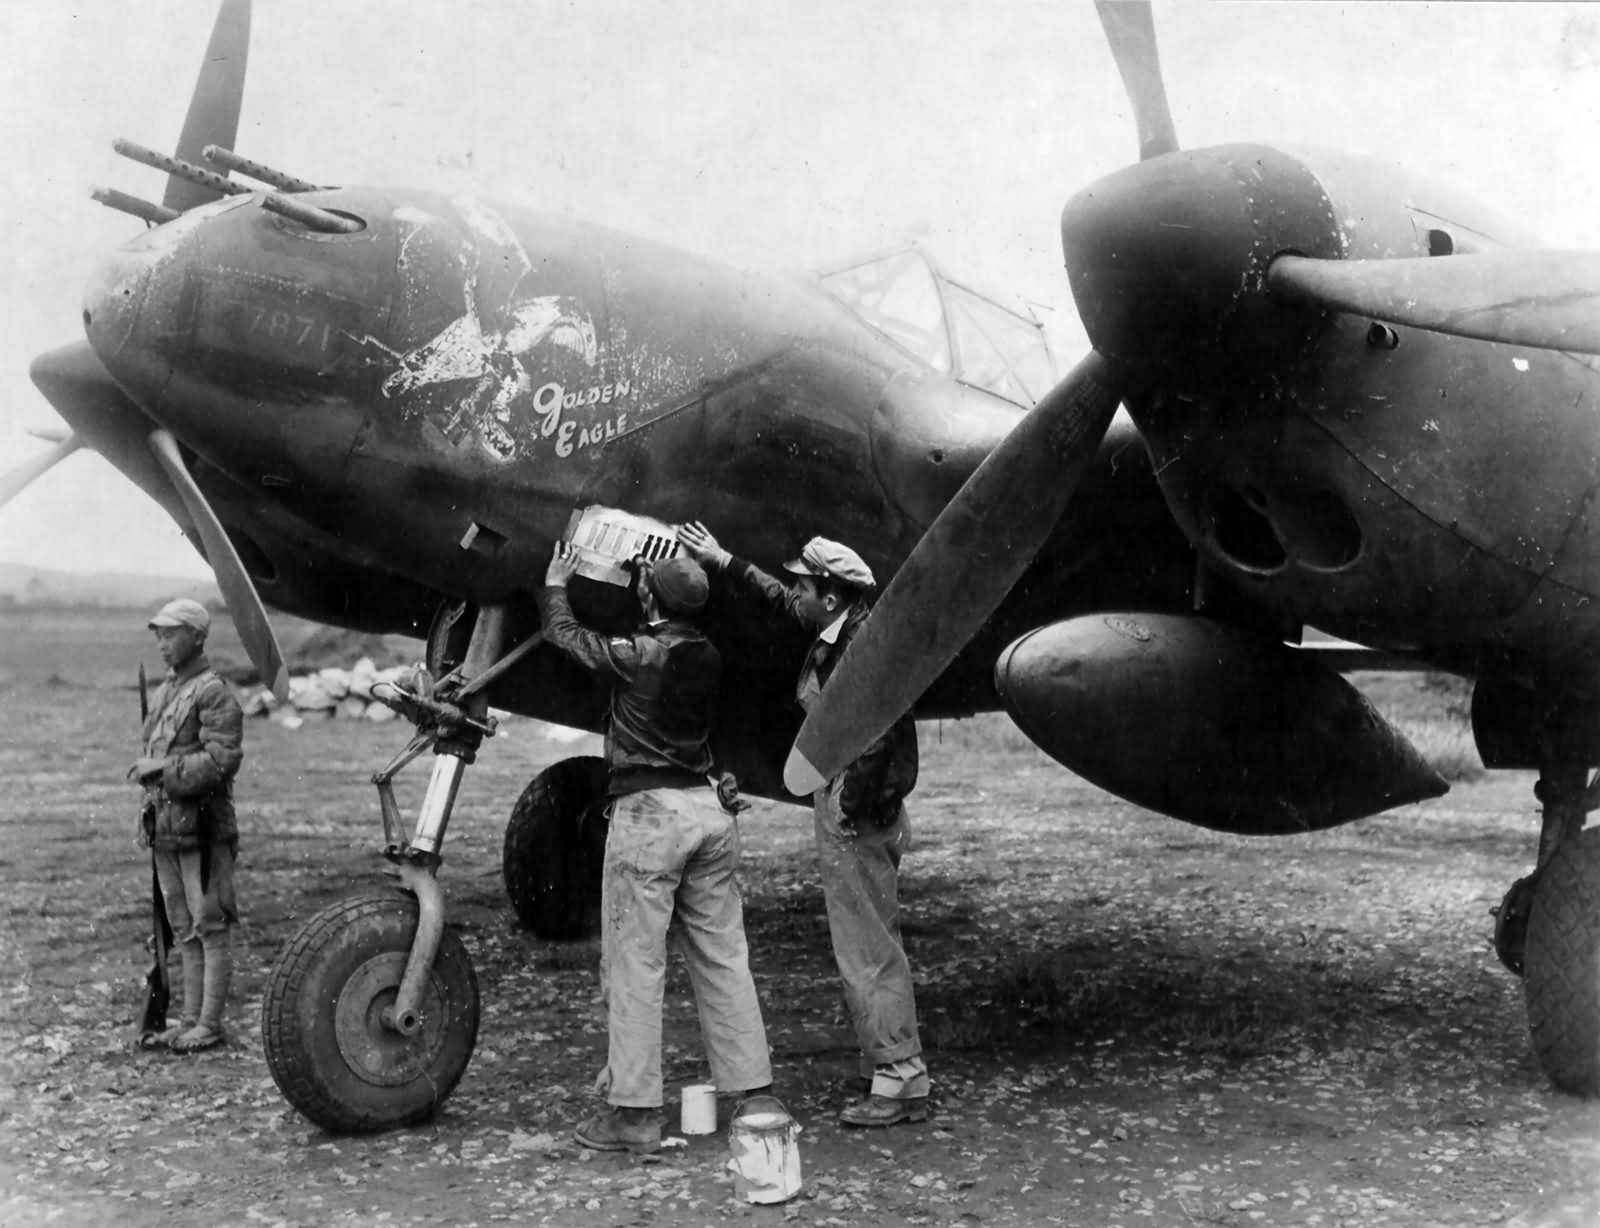 P-38G Lightning 42-13437 „The Golden Eagle”, pilot: Capt Billie Beardsley of the 51st Fighter Group 449th FS Twin Tailed Dragons